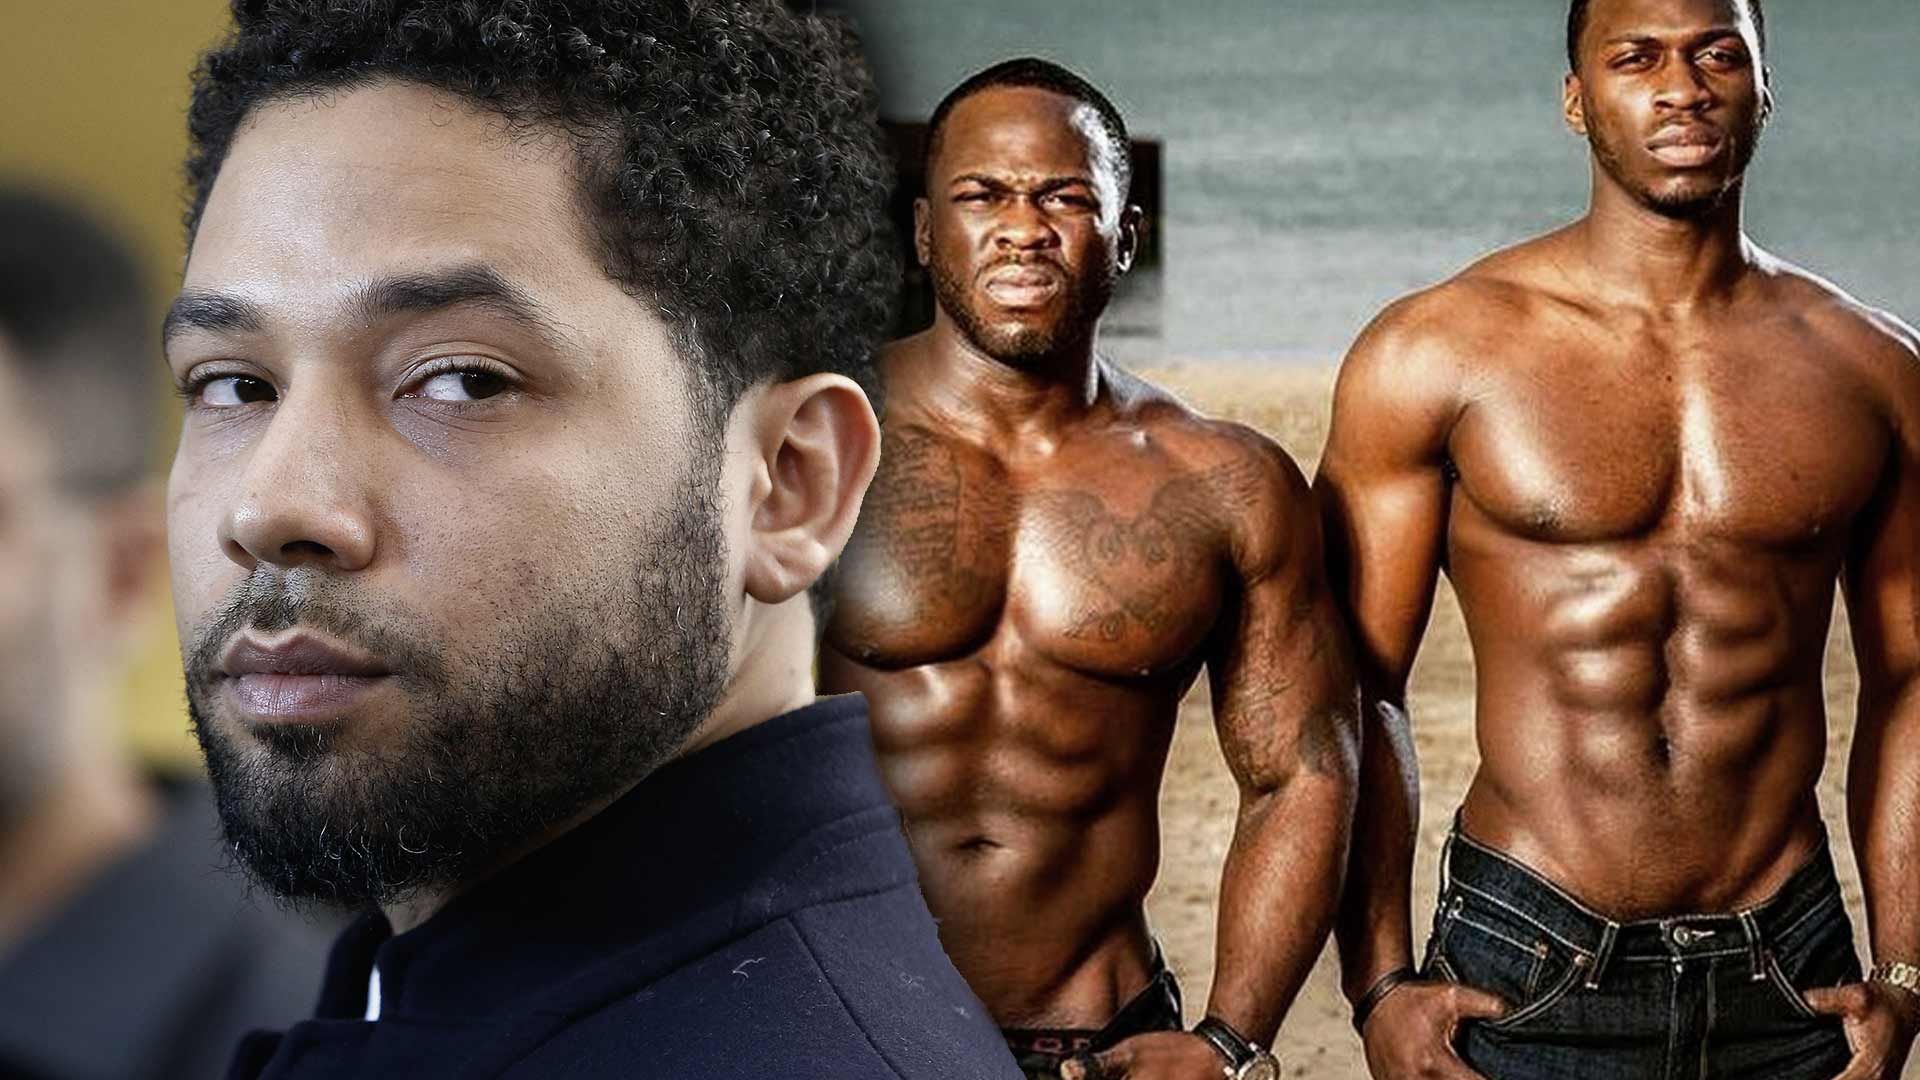 Jussie Smollett was sexually involved with one of the Osundairo brothers new report claims